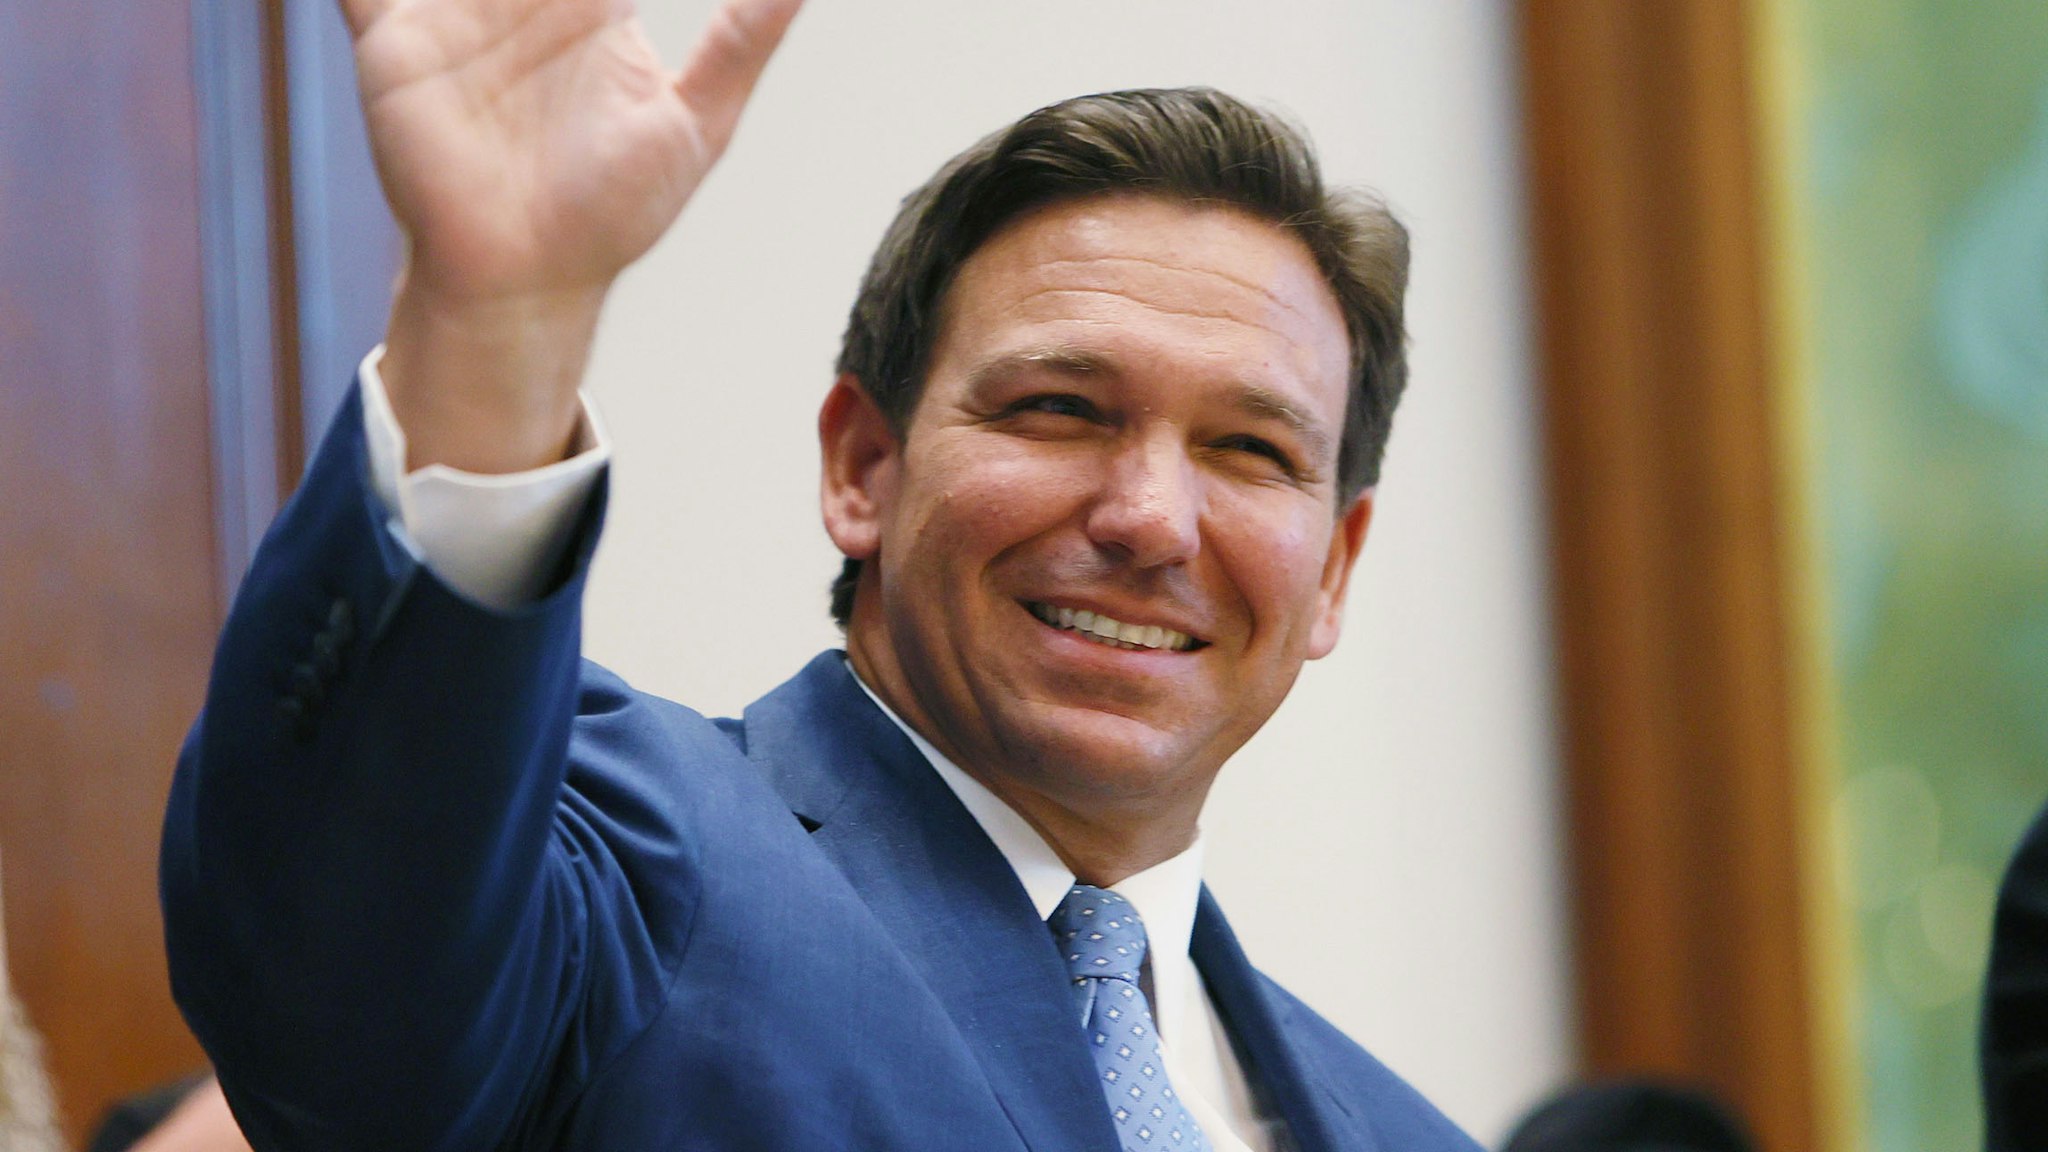 SURFSIDE, FLORIDA - JUNE 14: Florida Gov. Ron DeSantis arrives to speak during a press conference at the Shul of Bal Harbour on June 14, 2021 in Surfside, Florida. The governor spoke about the two bills he signed HB 529 and HB 805. HB 805 ensures that volunteer ambulance services, including Hatzalah, can operate. HB 529 requires Florida schools to hold a daily moment of silence.